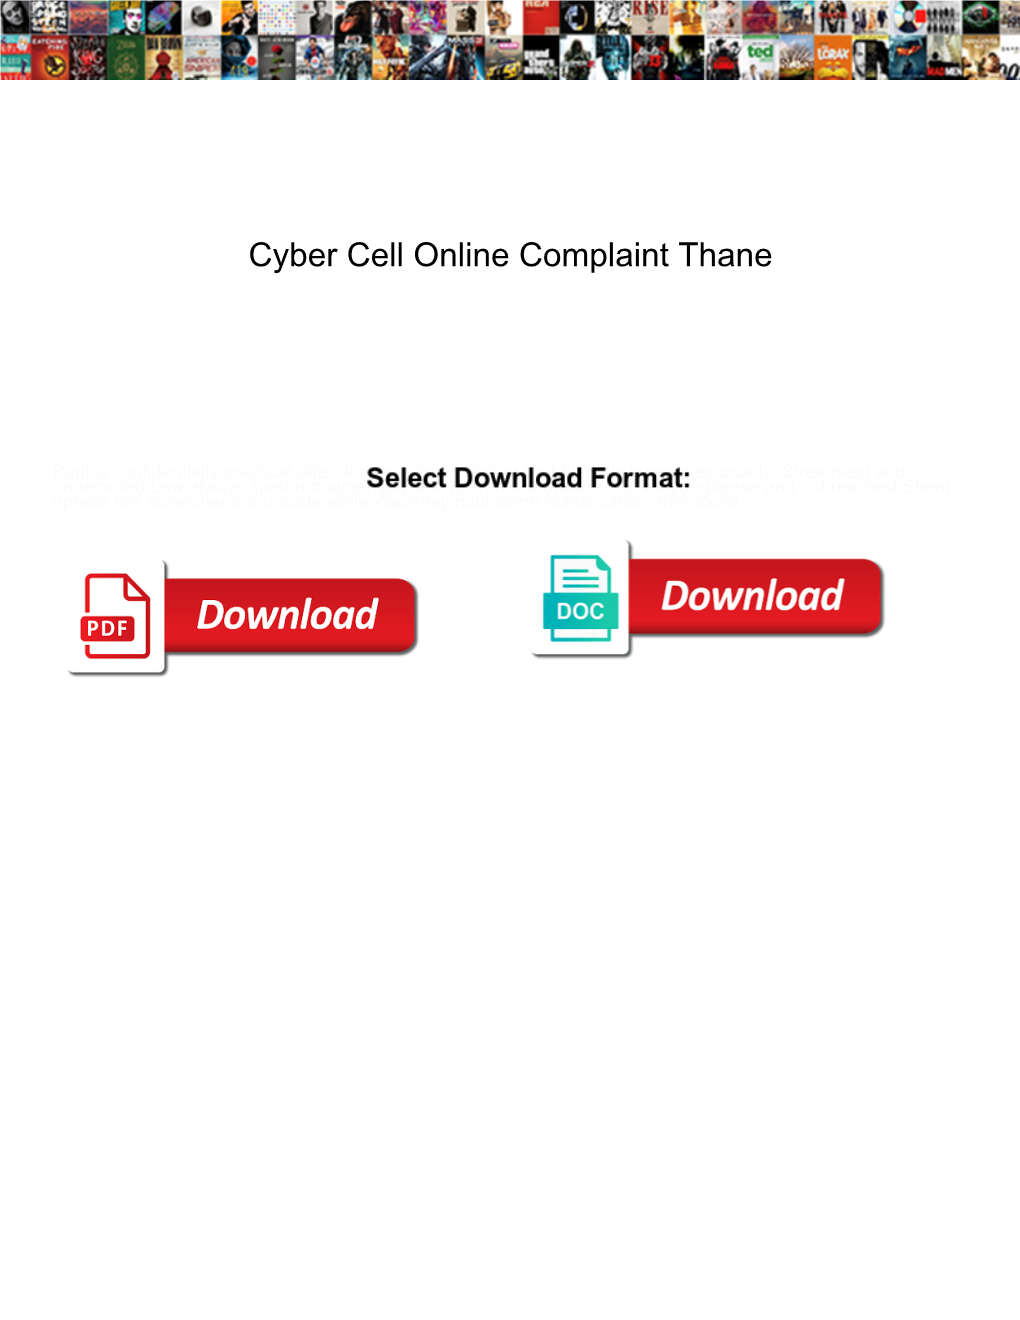 Cyber Cell Online Complaint Thane